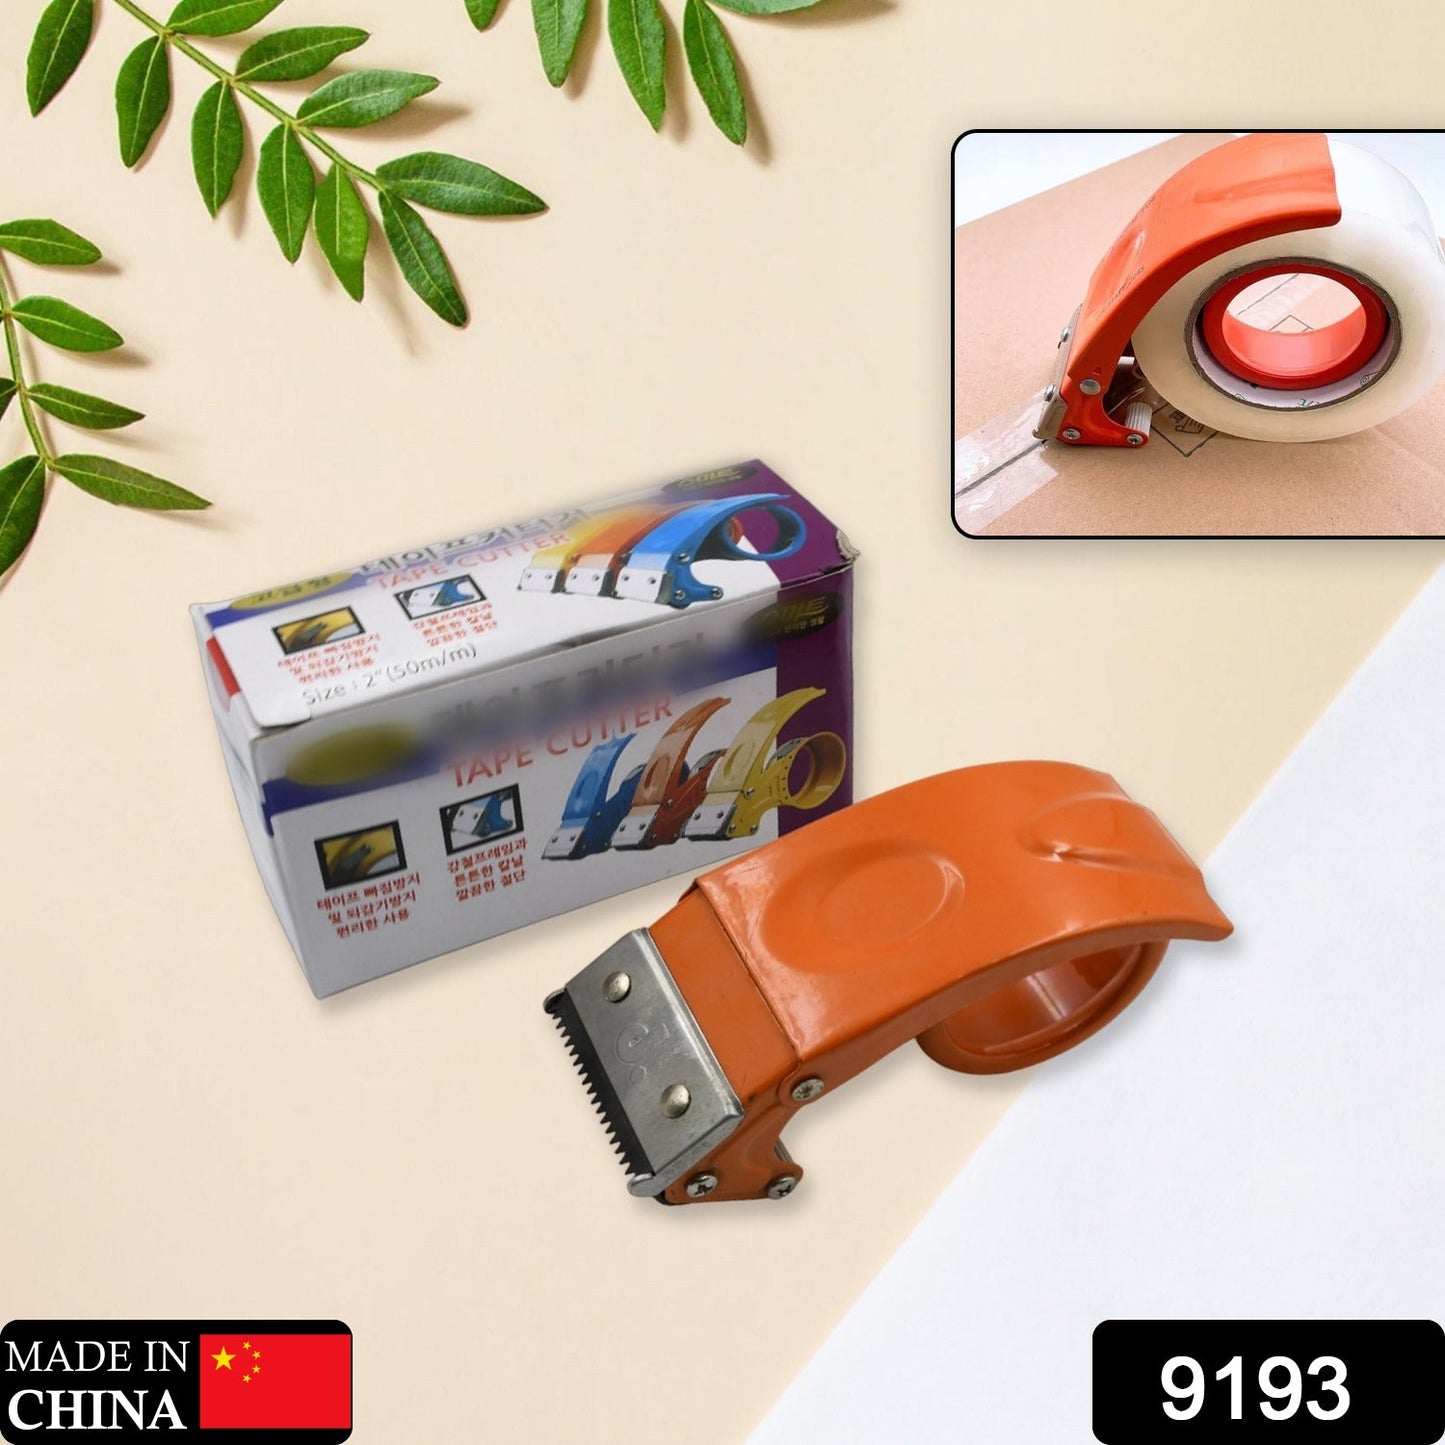 9193 Metal Packing Tape Dispenser Cutter for Home Office use, Tape Dispenser for Stationary, Tape Cutter Packaging Tape 55mm